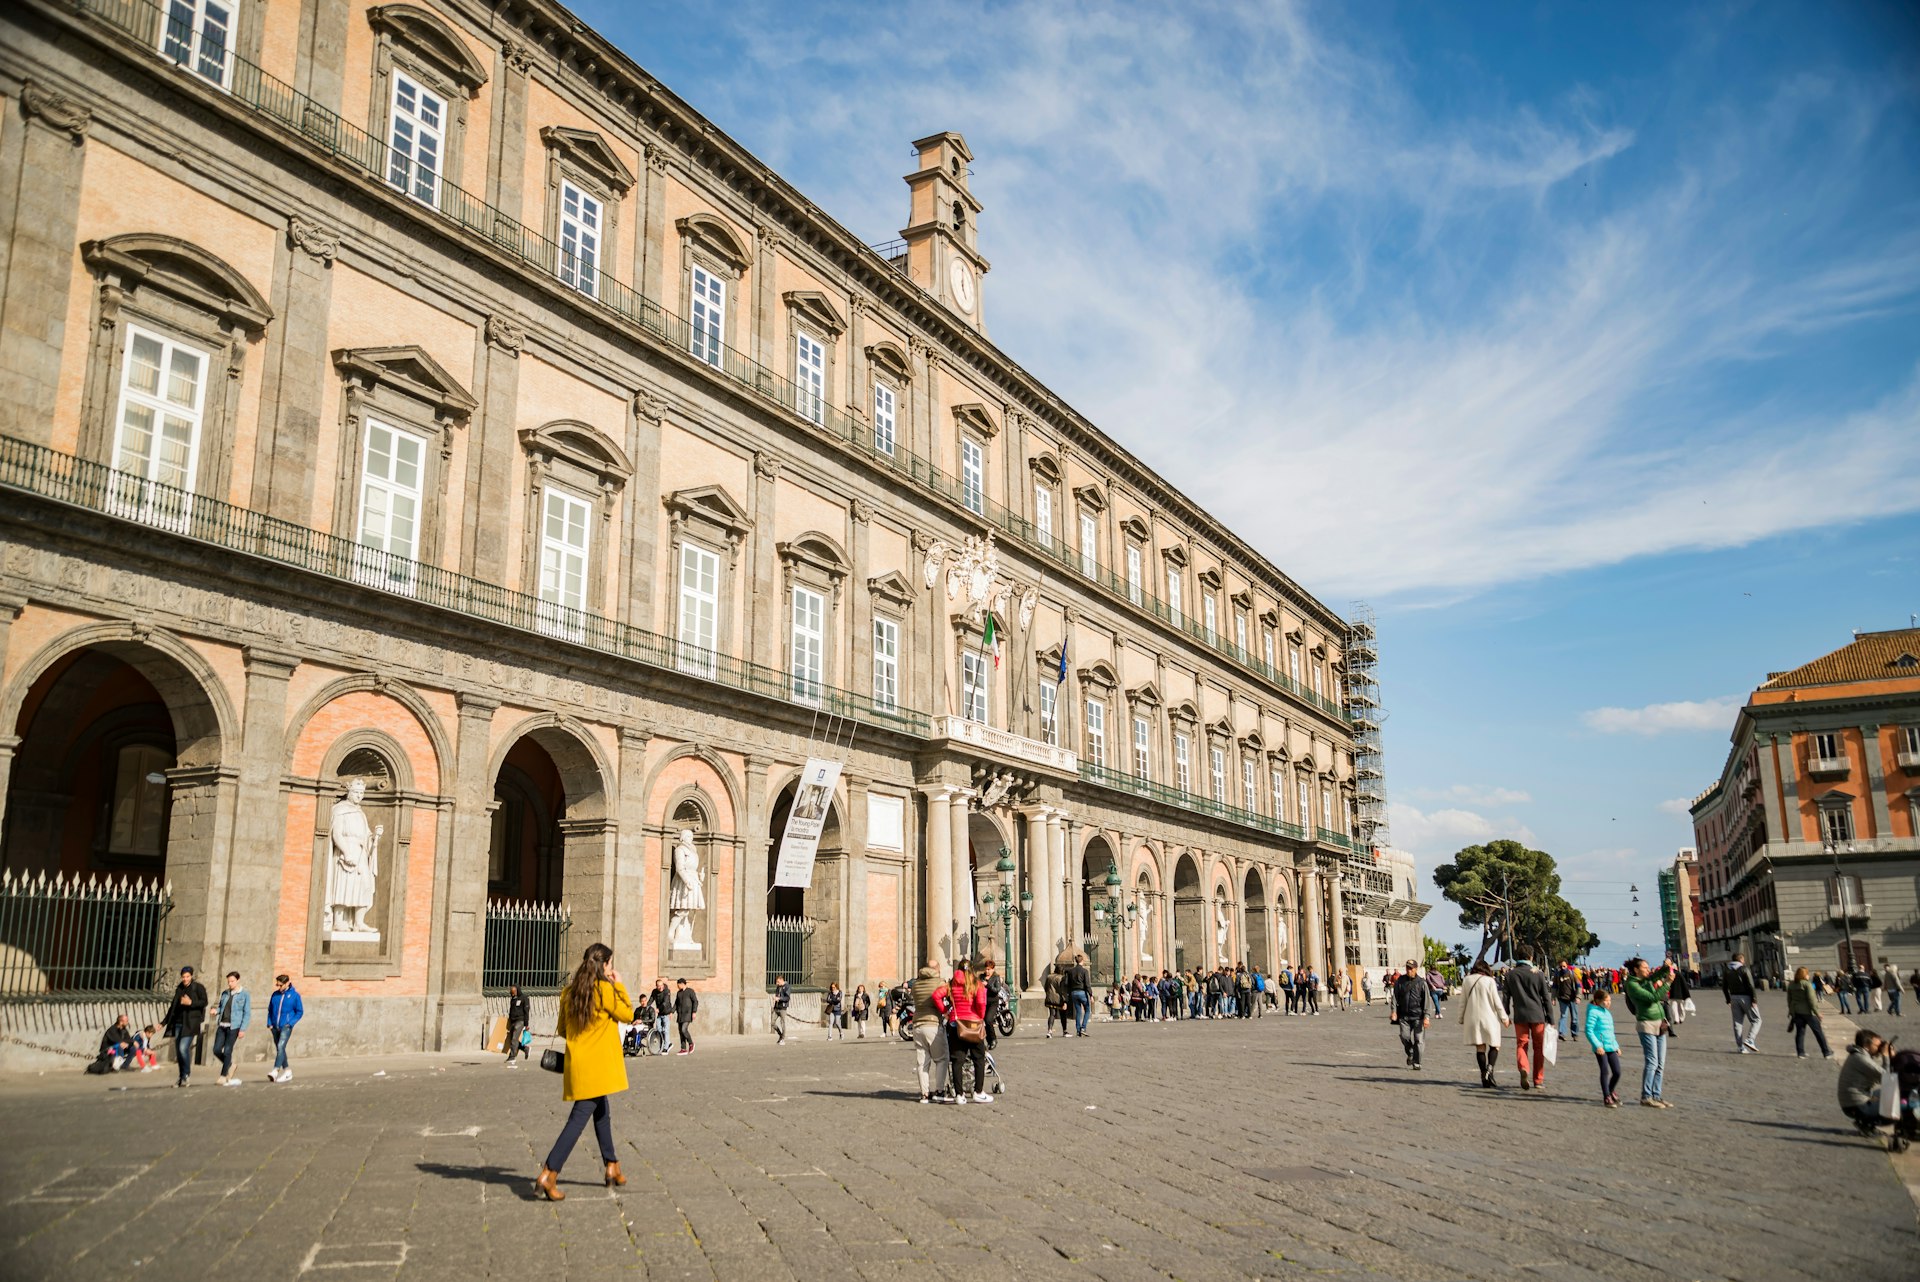 Tourists walk in front of the facade of the historical Royal Palace in Naples